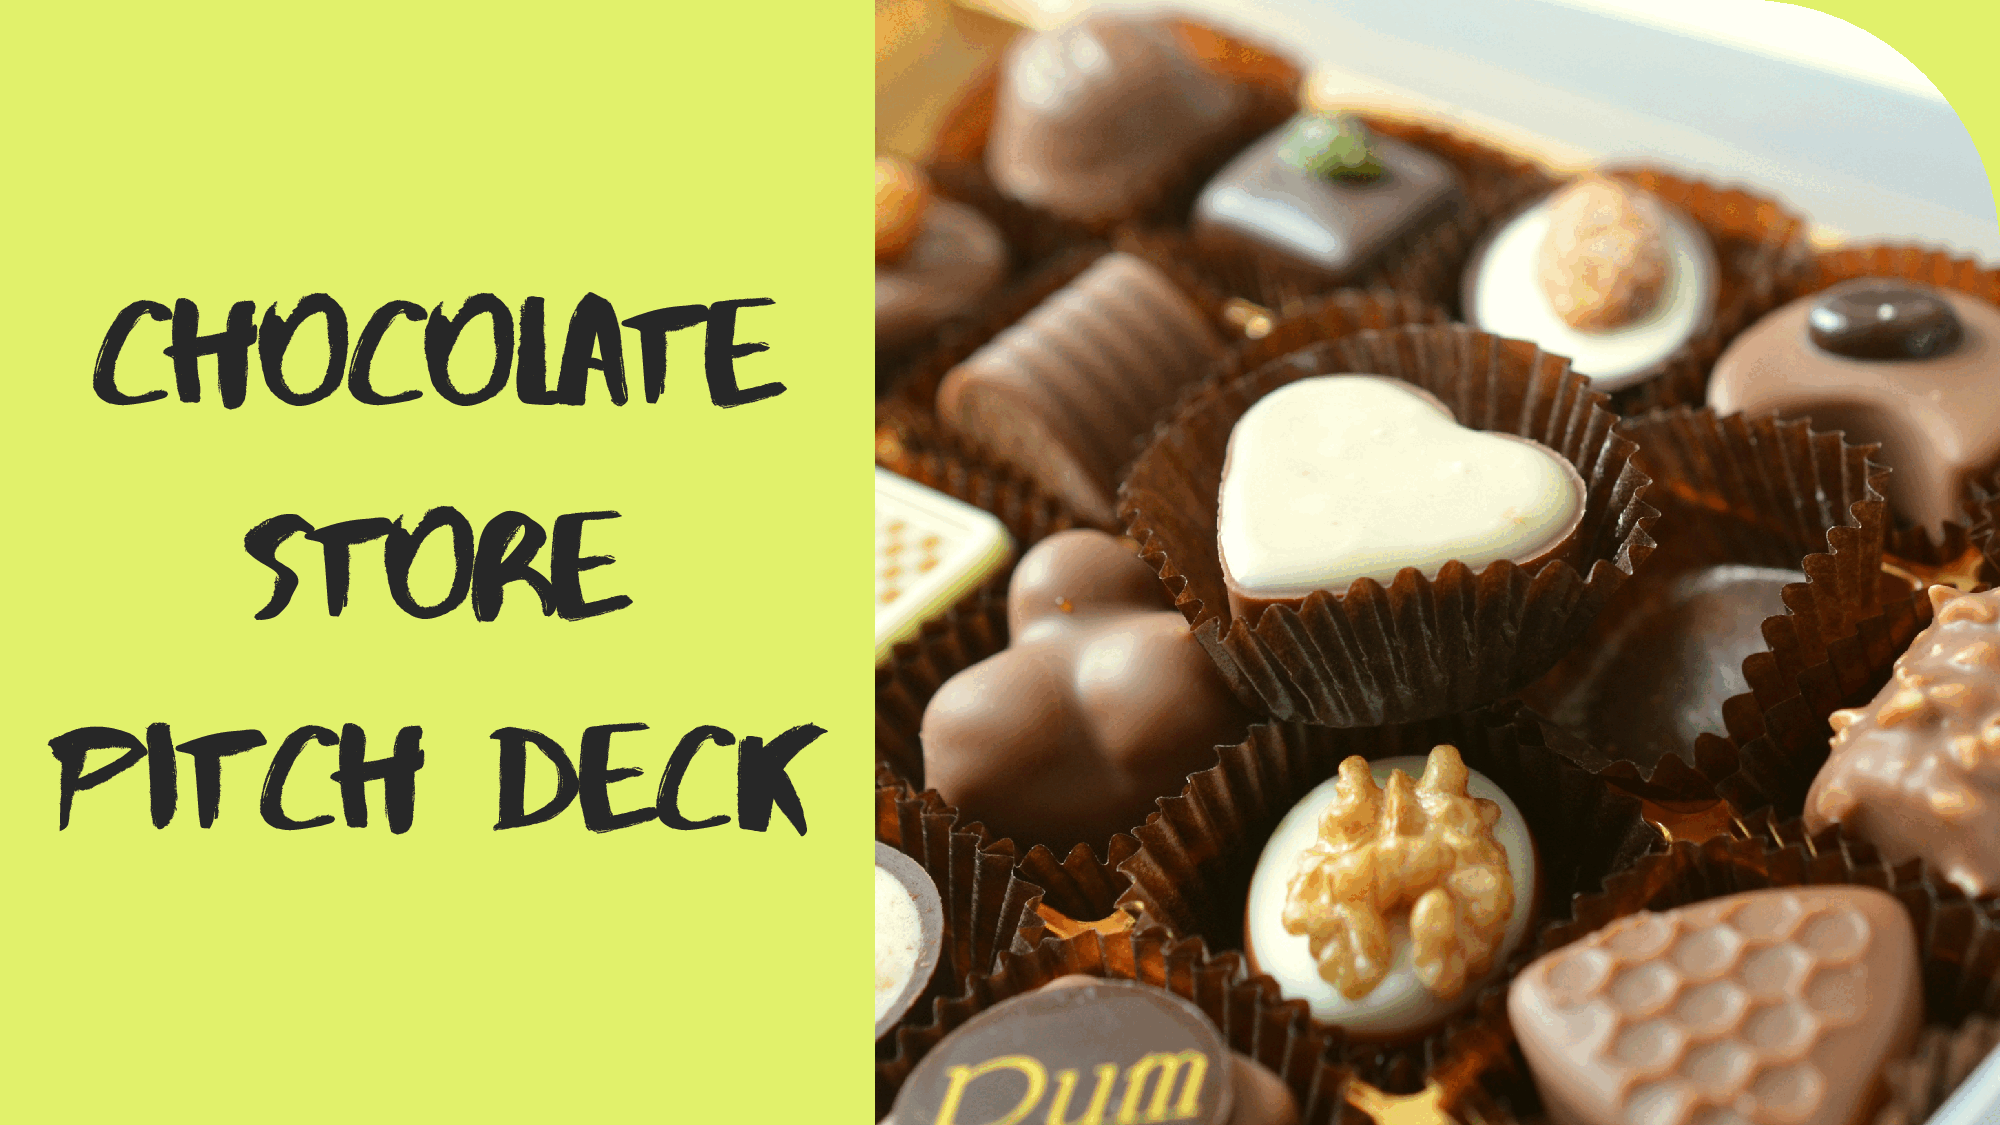 Chocolate Store Pitch Deck Template (32-page PDF document) Preview Image